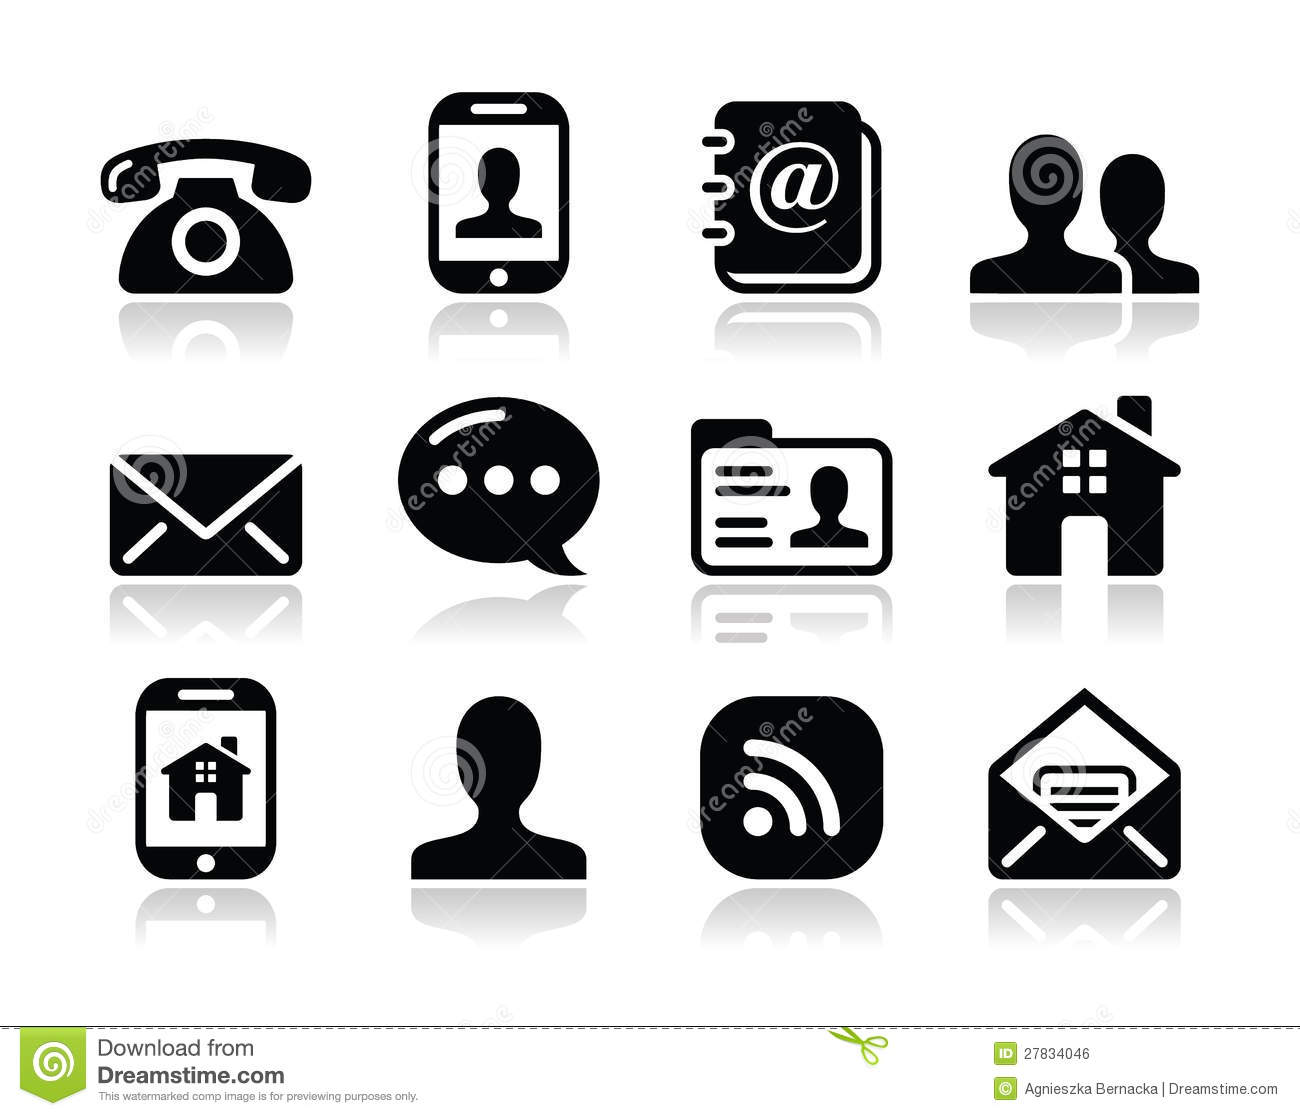 Email Phone Web Icons